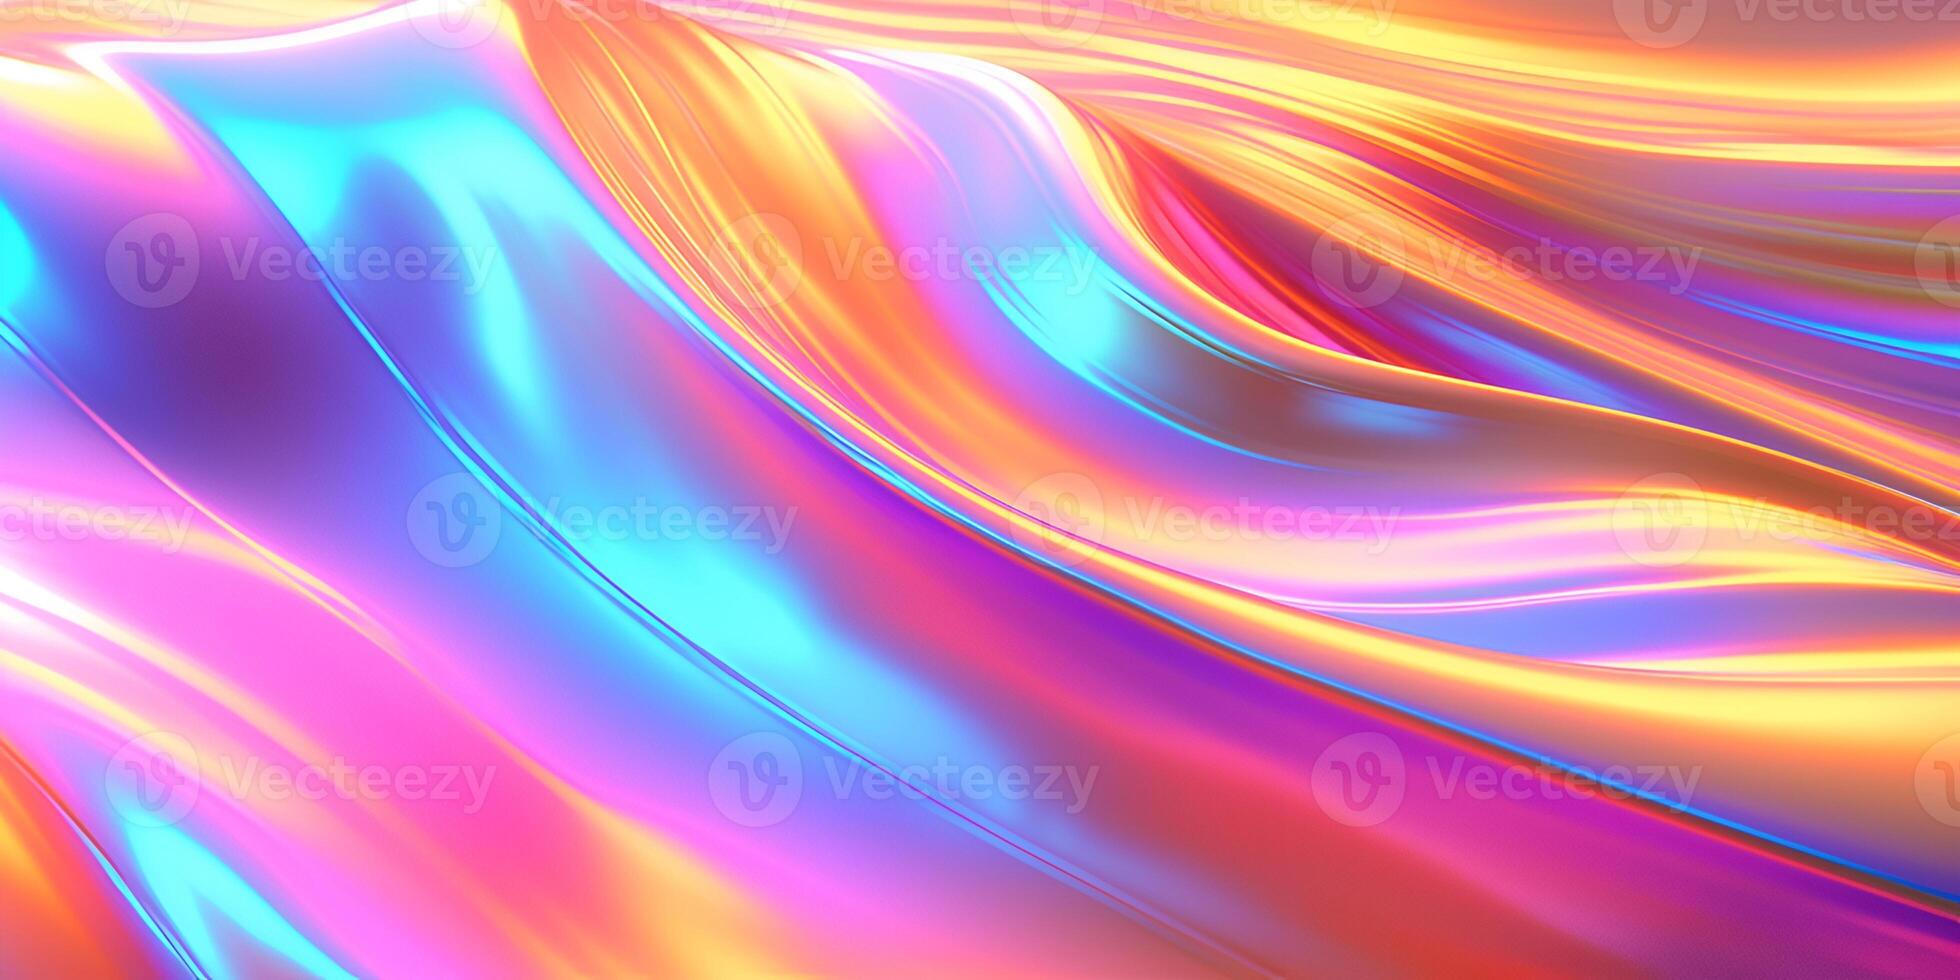 Hologram metal texture. Gradient abstract background. Holographic rainbow foil. Metal iridescent pattern. Iridescent foil effect texture. Pearlescent gradient. photo